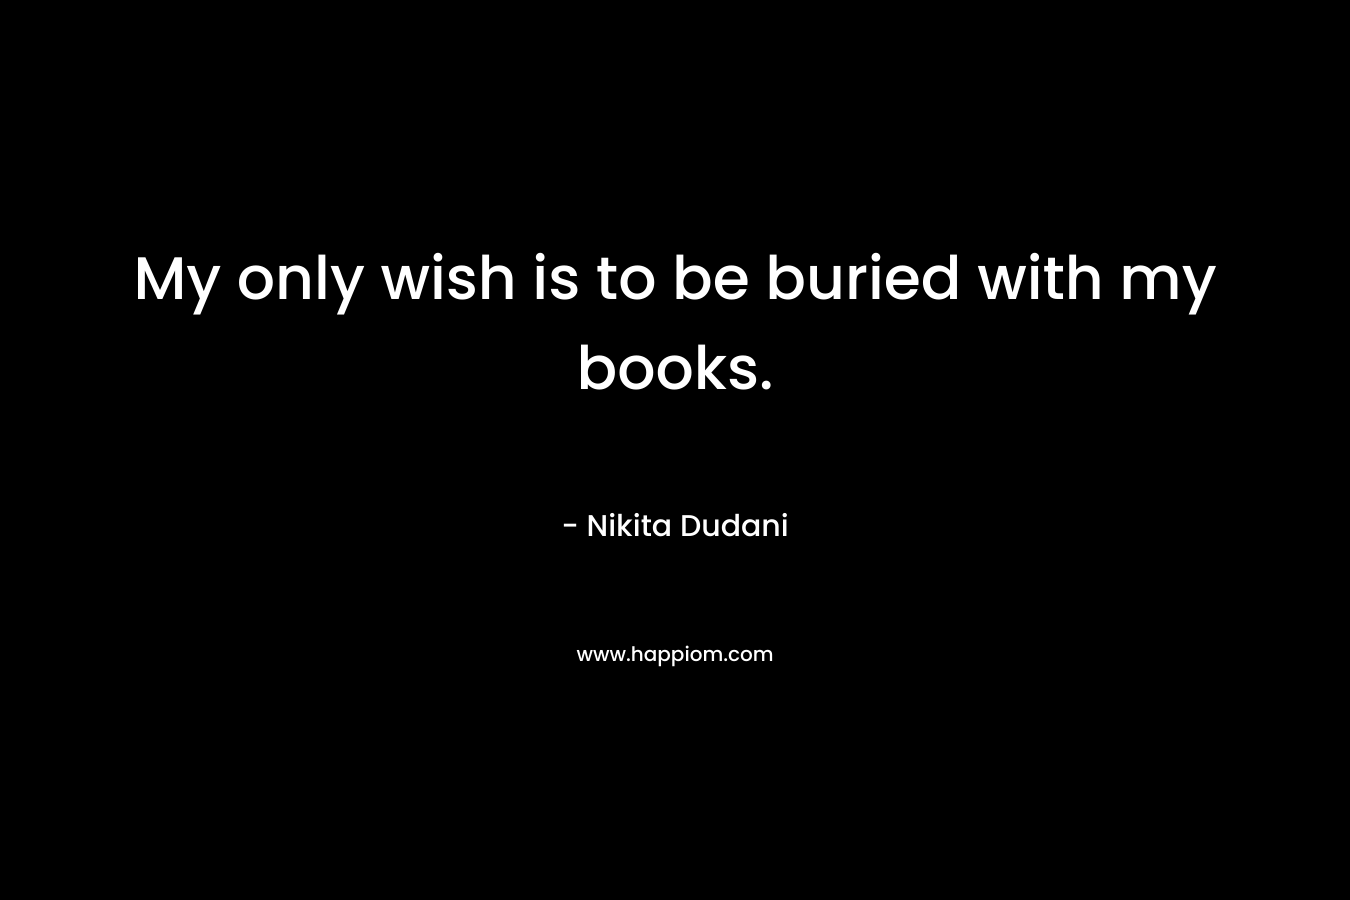 My only wish is to be buried with my books.